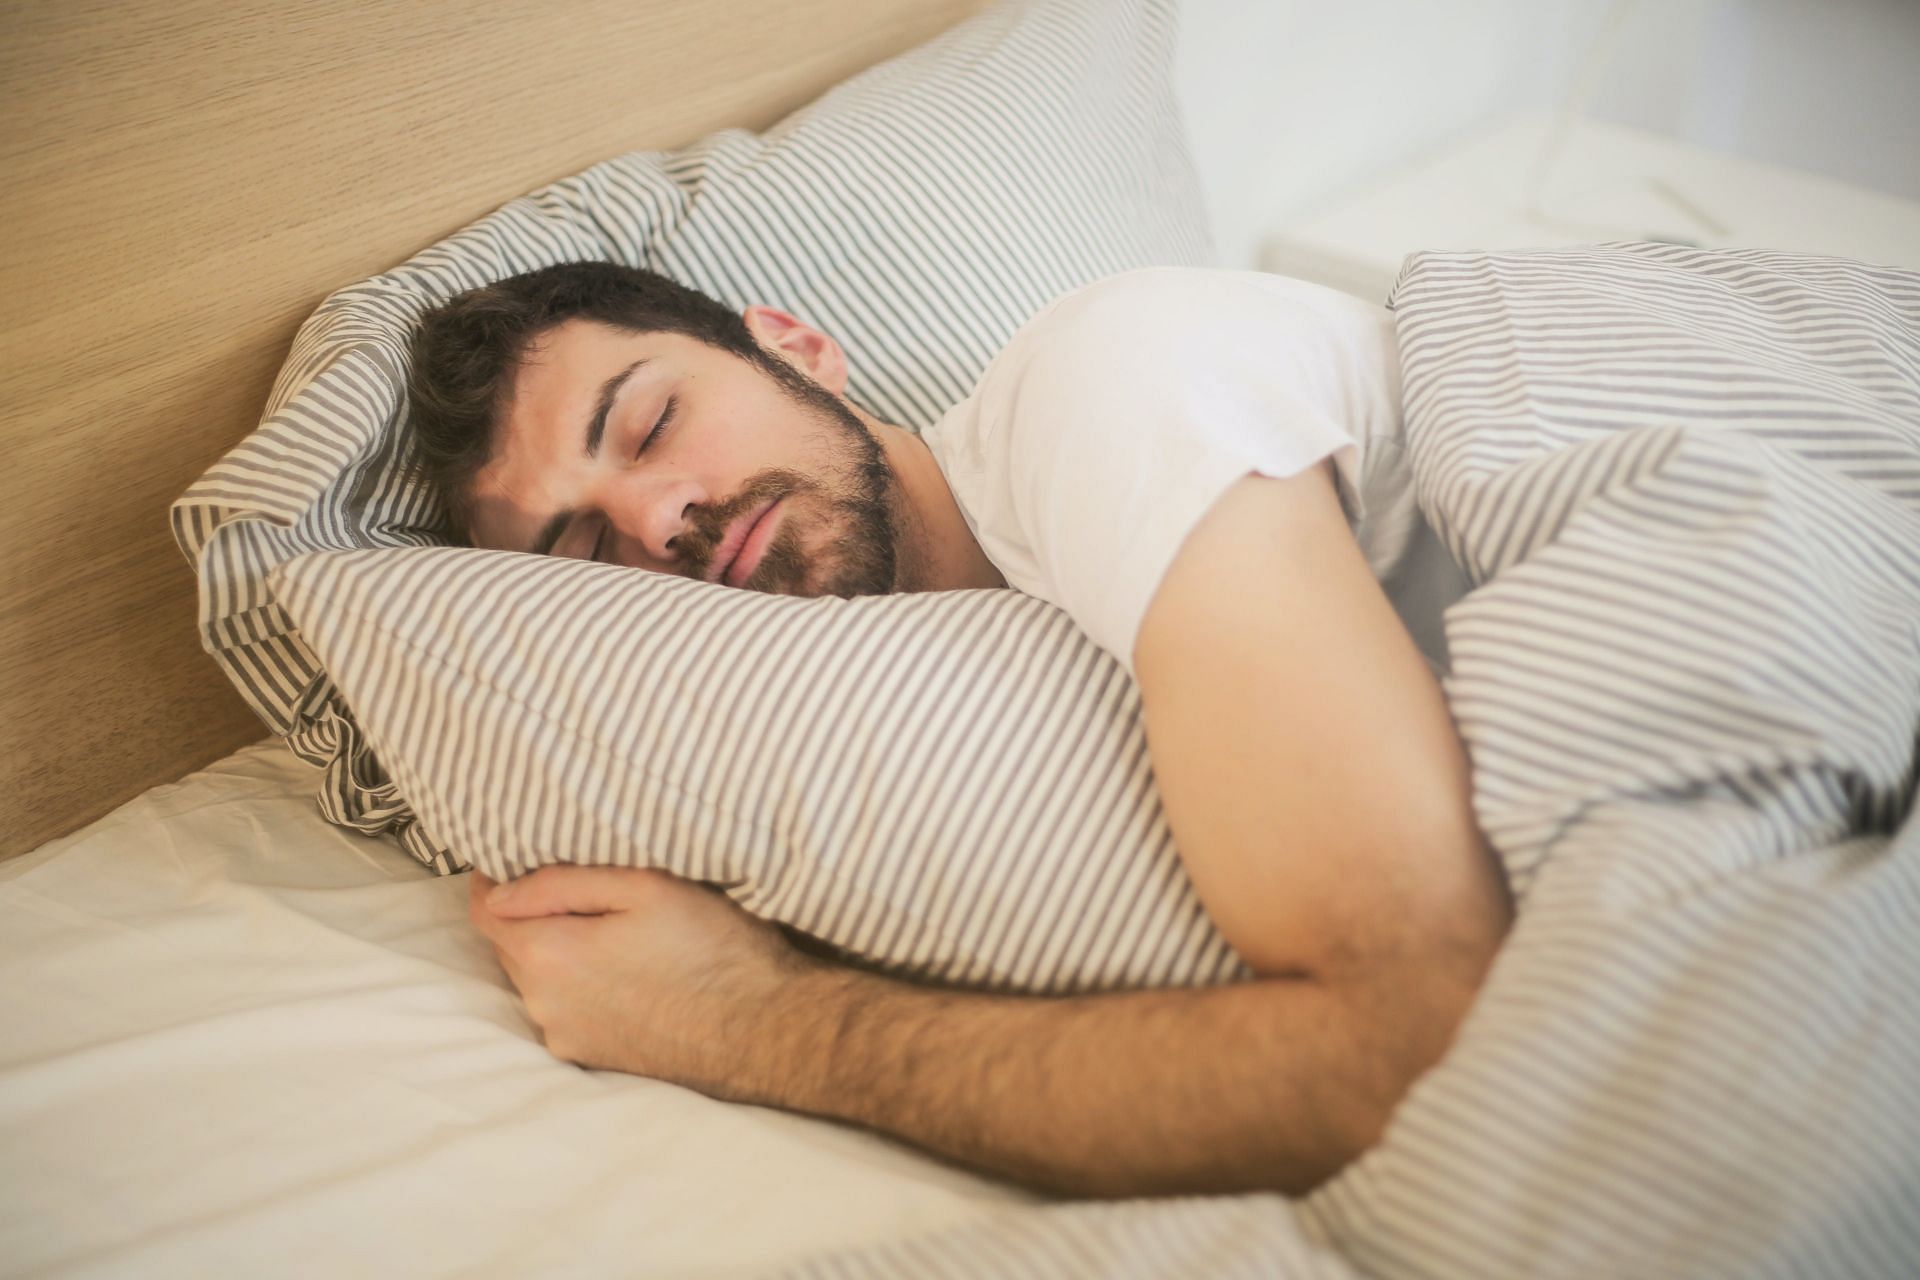 Worst signs of exhaustion (image sourced via Pexels / Photo by andres)